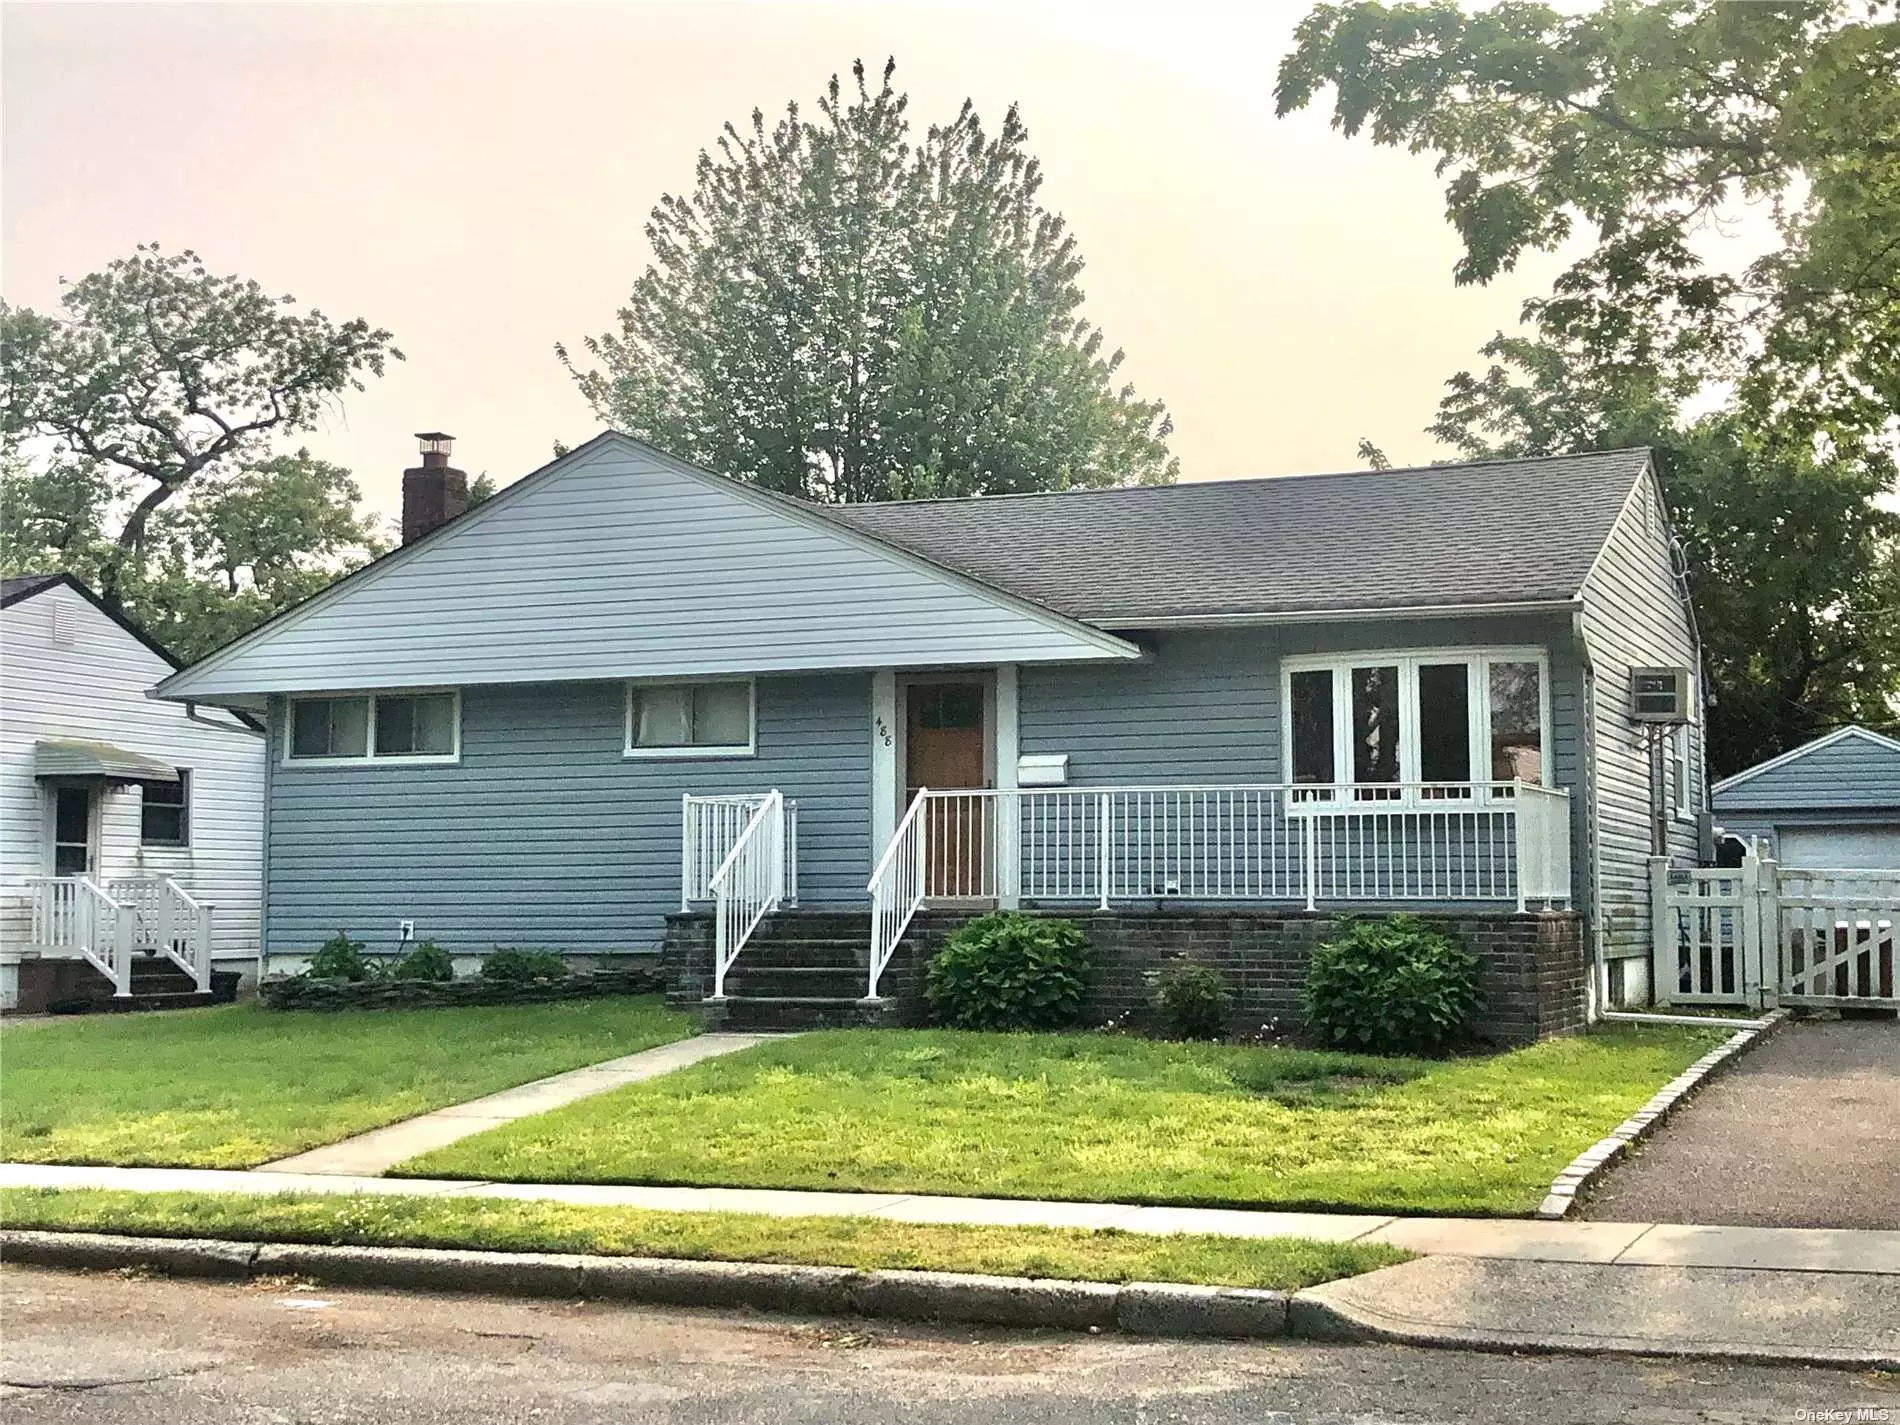 Lovely 2/3 Bedroom Ranch, Eat-in-Kitchen w/Gas Cooking, Dining Room, Living Room. Mid-Block Location, Hardwood Floors, Full Finished Basement, 1 1/2 Car Detached Garage, Deck .Close to Parkways, Convenient to Shopping. Island Trees School District.